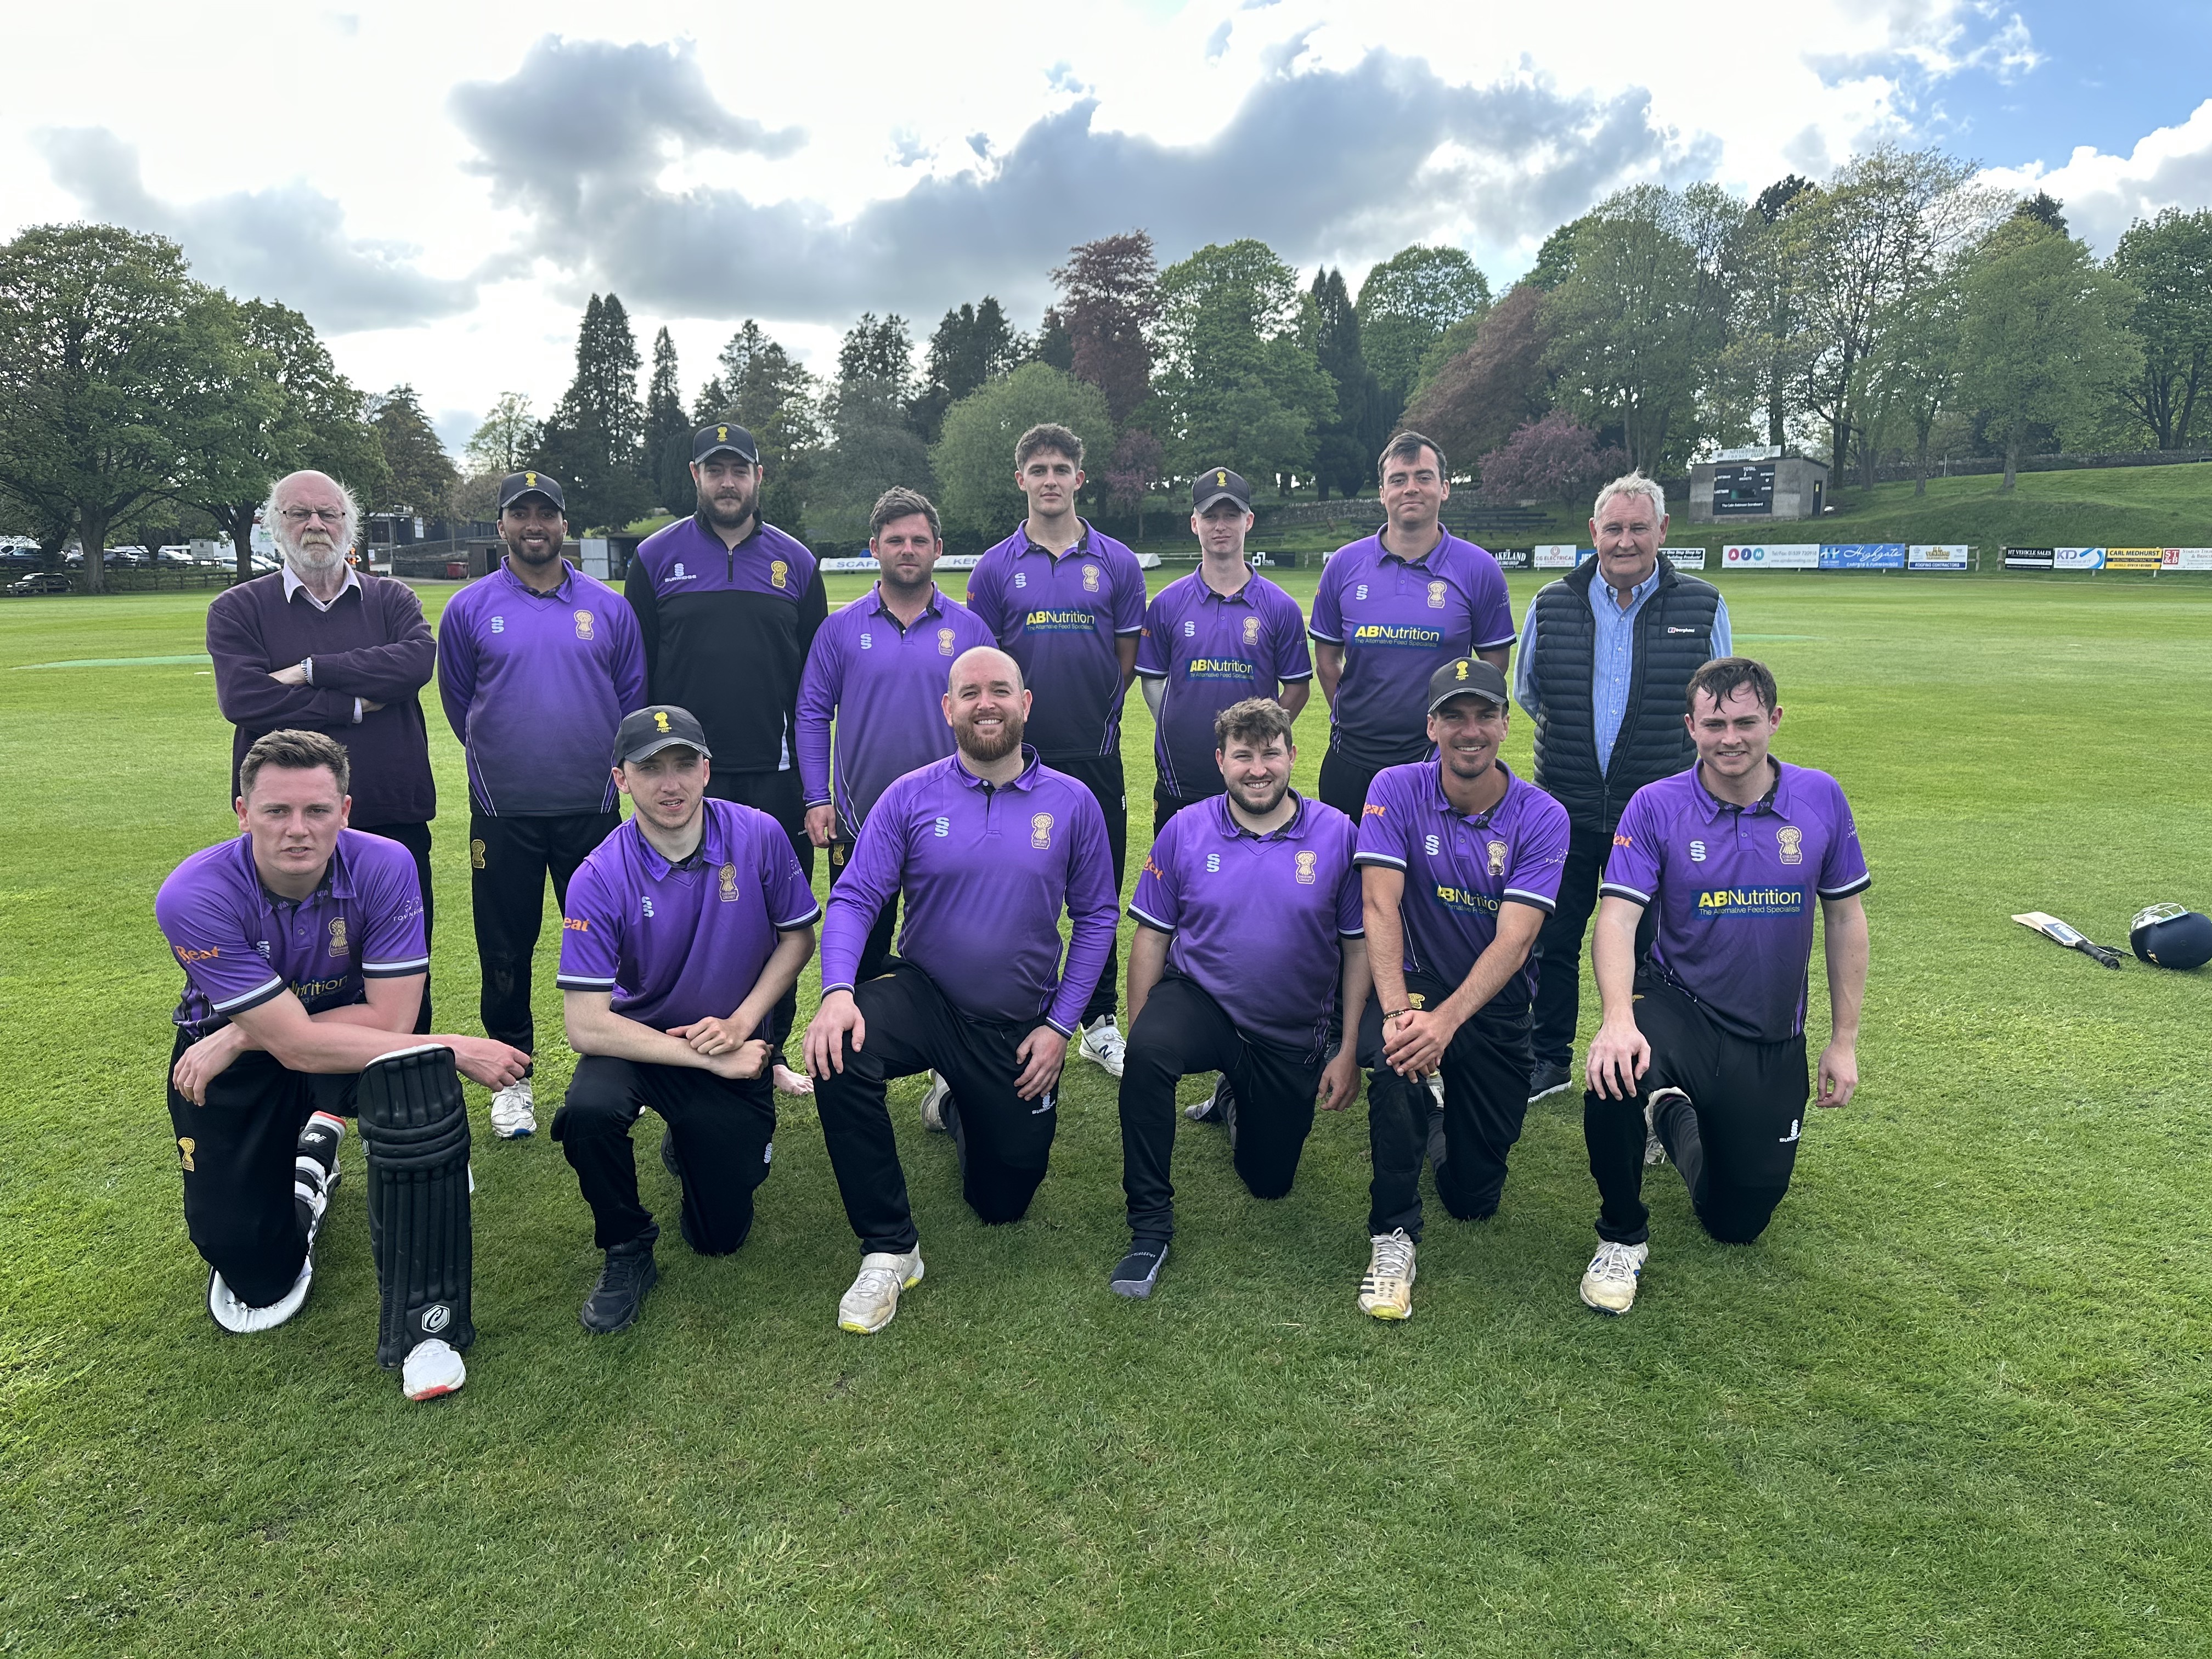 Double win at Netherfield and runners-up in group